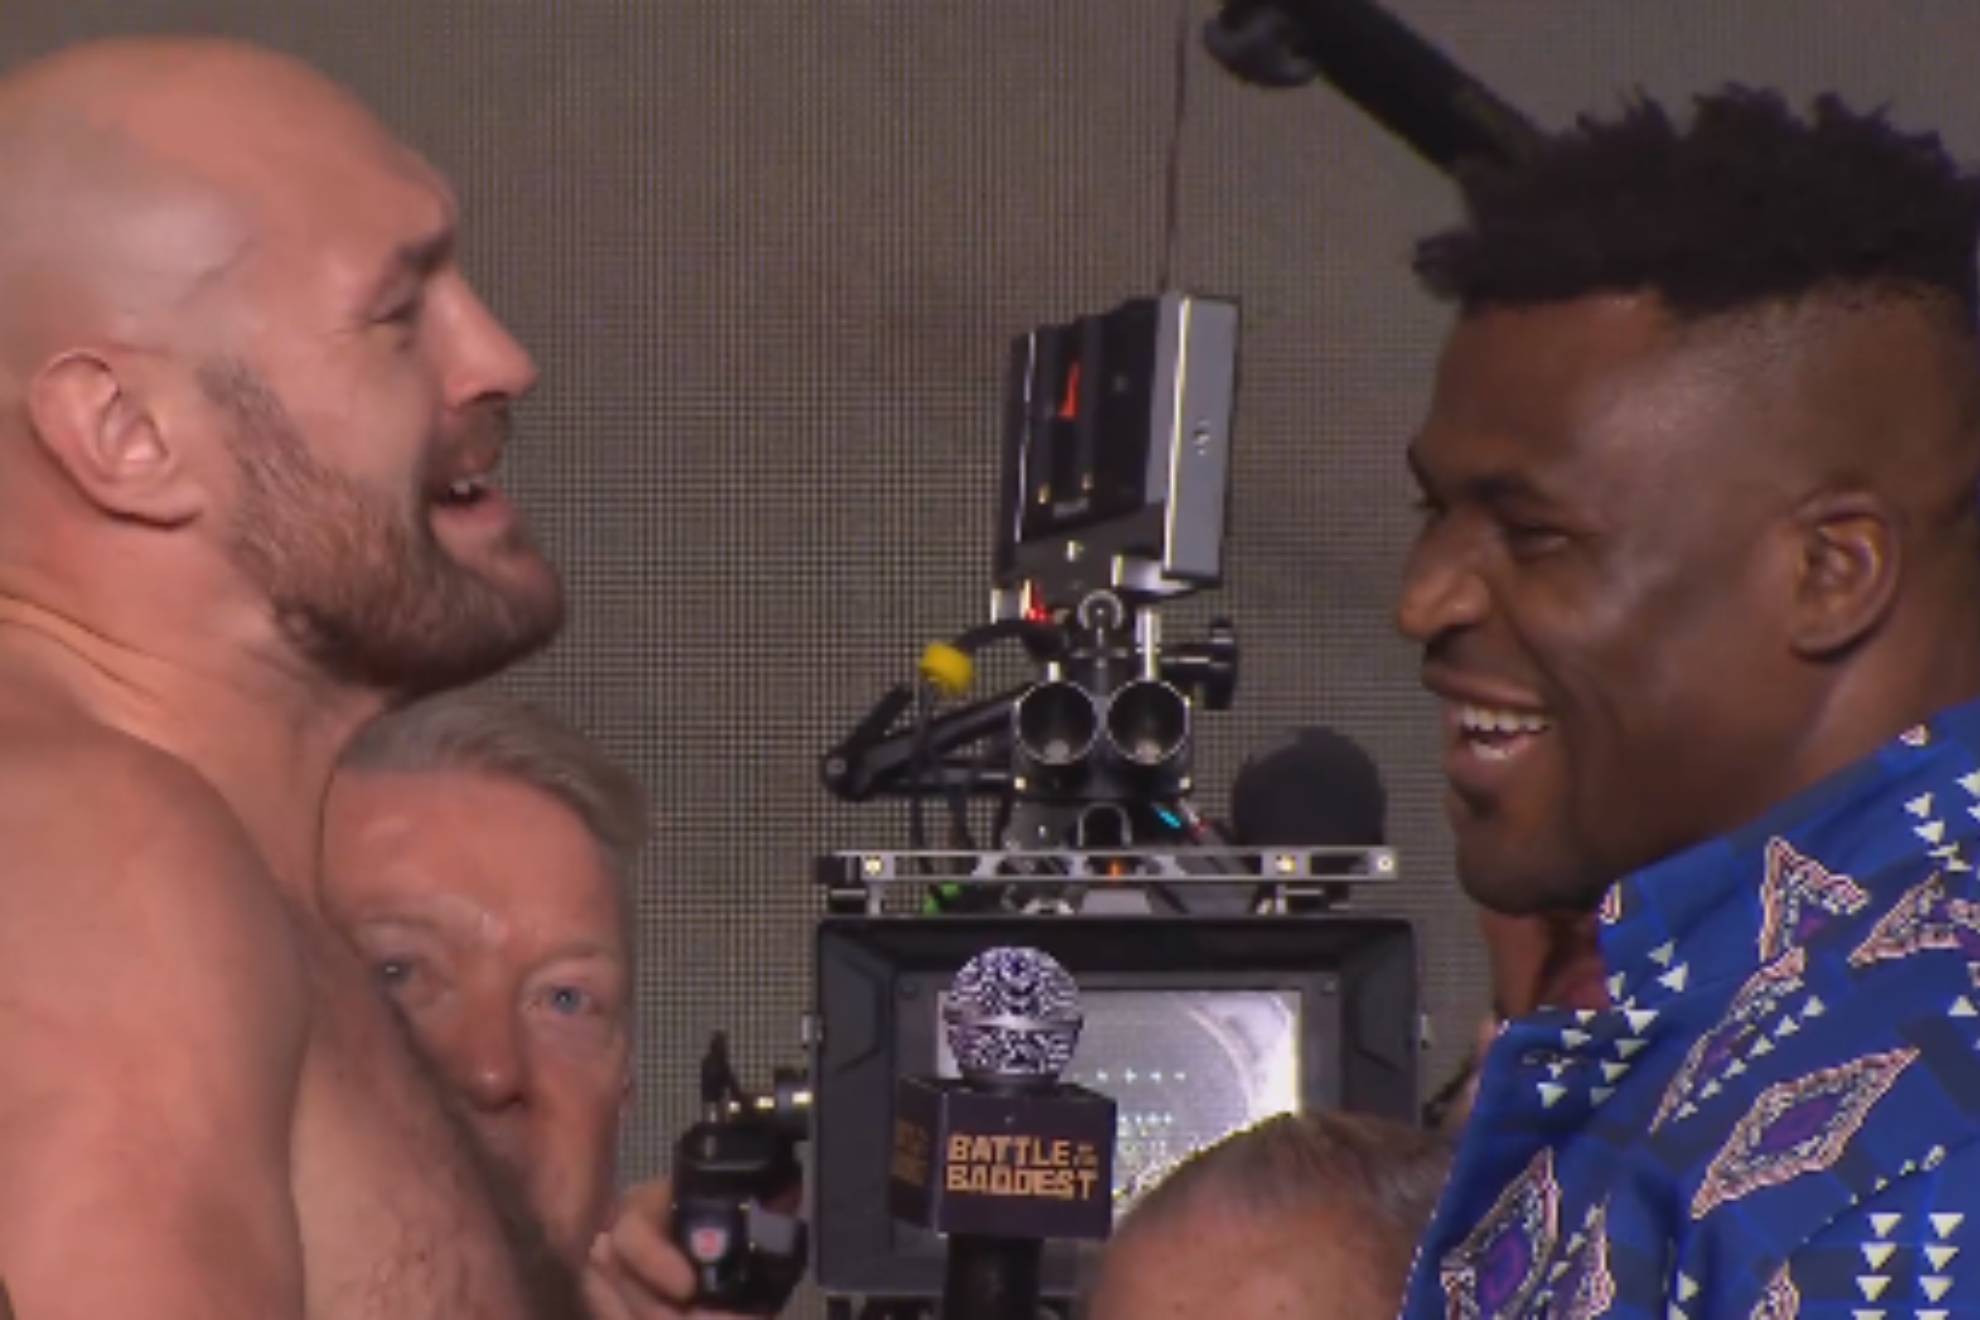 Fury and Ngannou face off ahead of 'Battle of the Baddest' in Riyadh